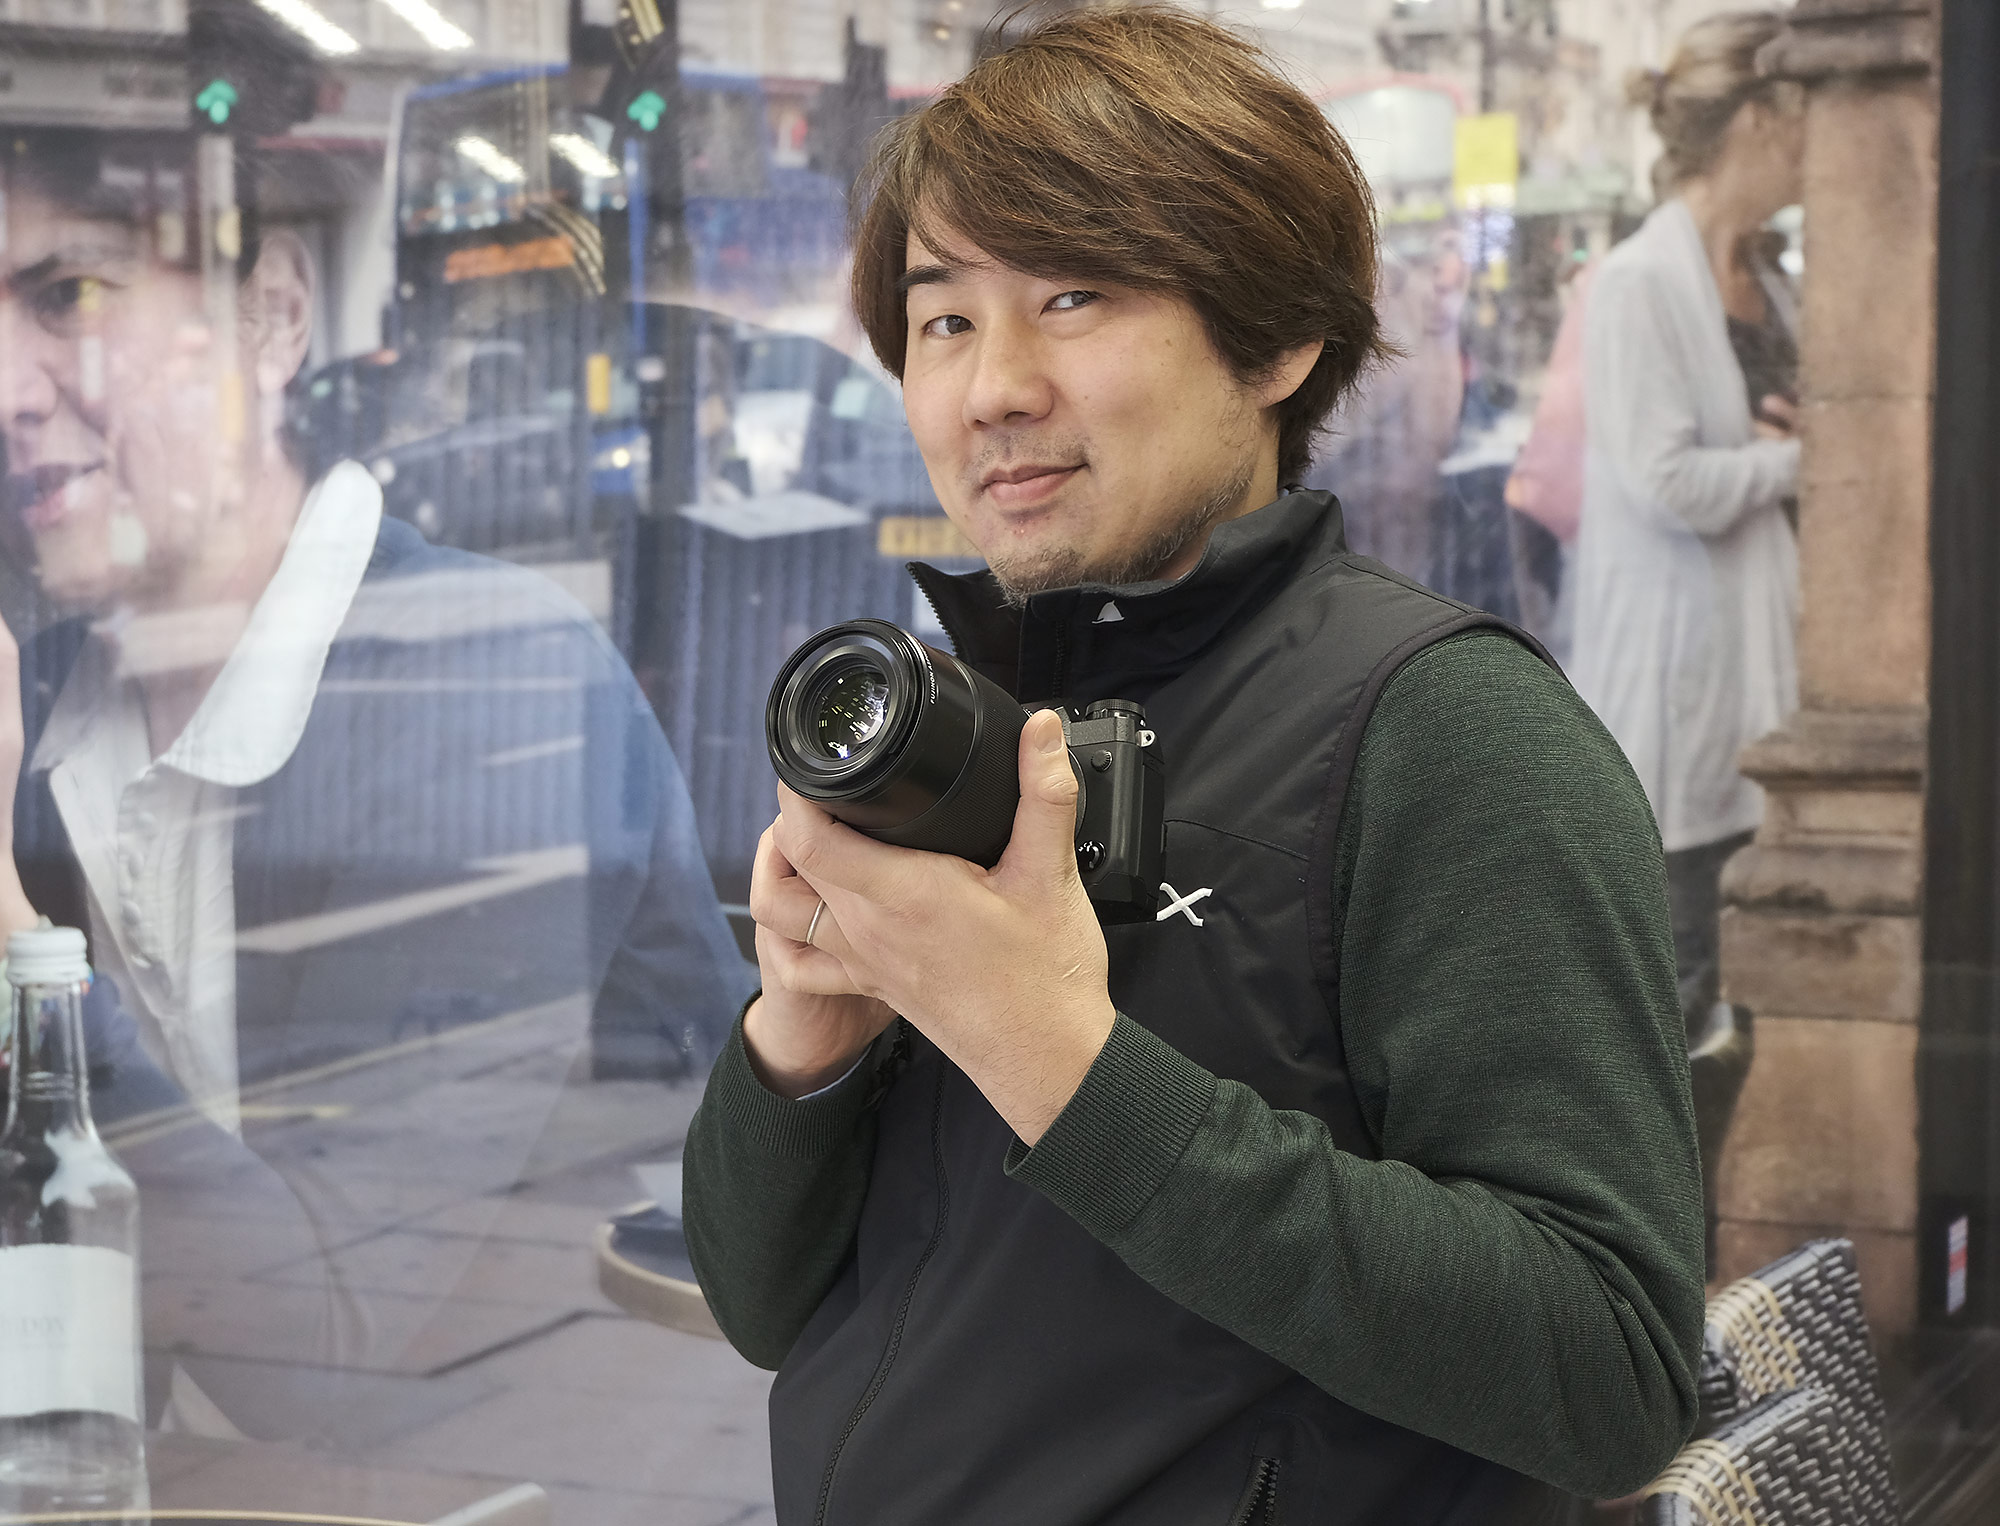 Jun Watanabe is the Manager of Product Planning in the Sales & Marketing group of the Optical Device & Electronic Imaging Products Division at Fujifilm. - Image By DPReview